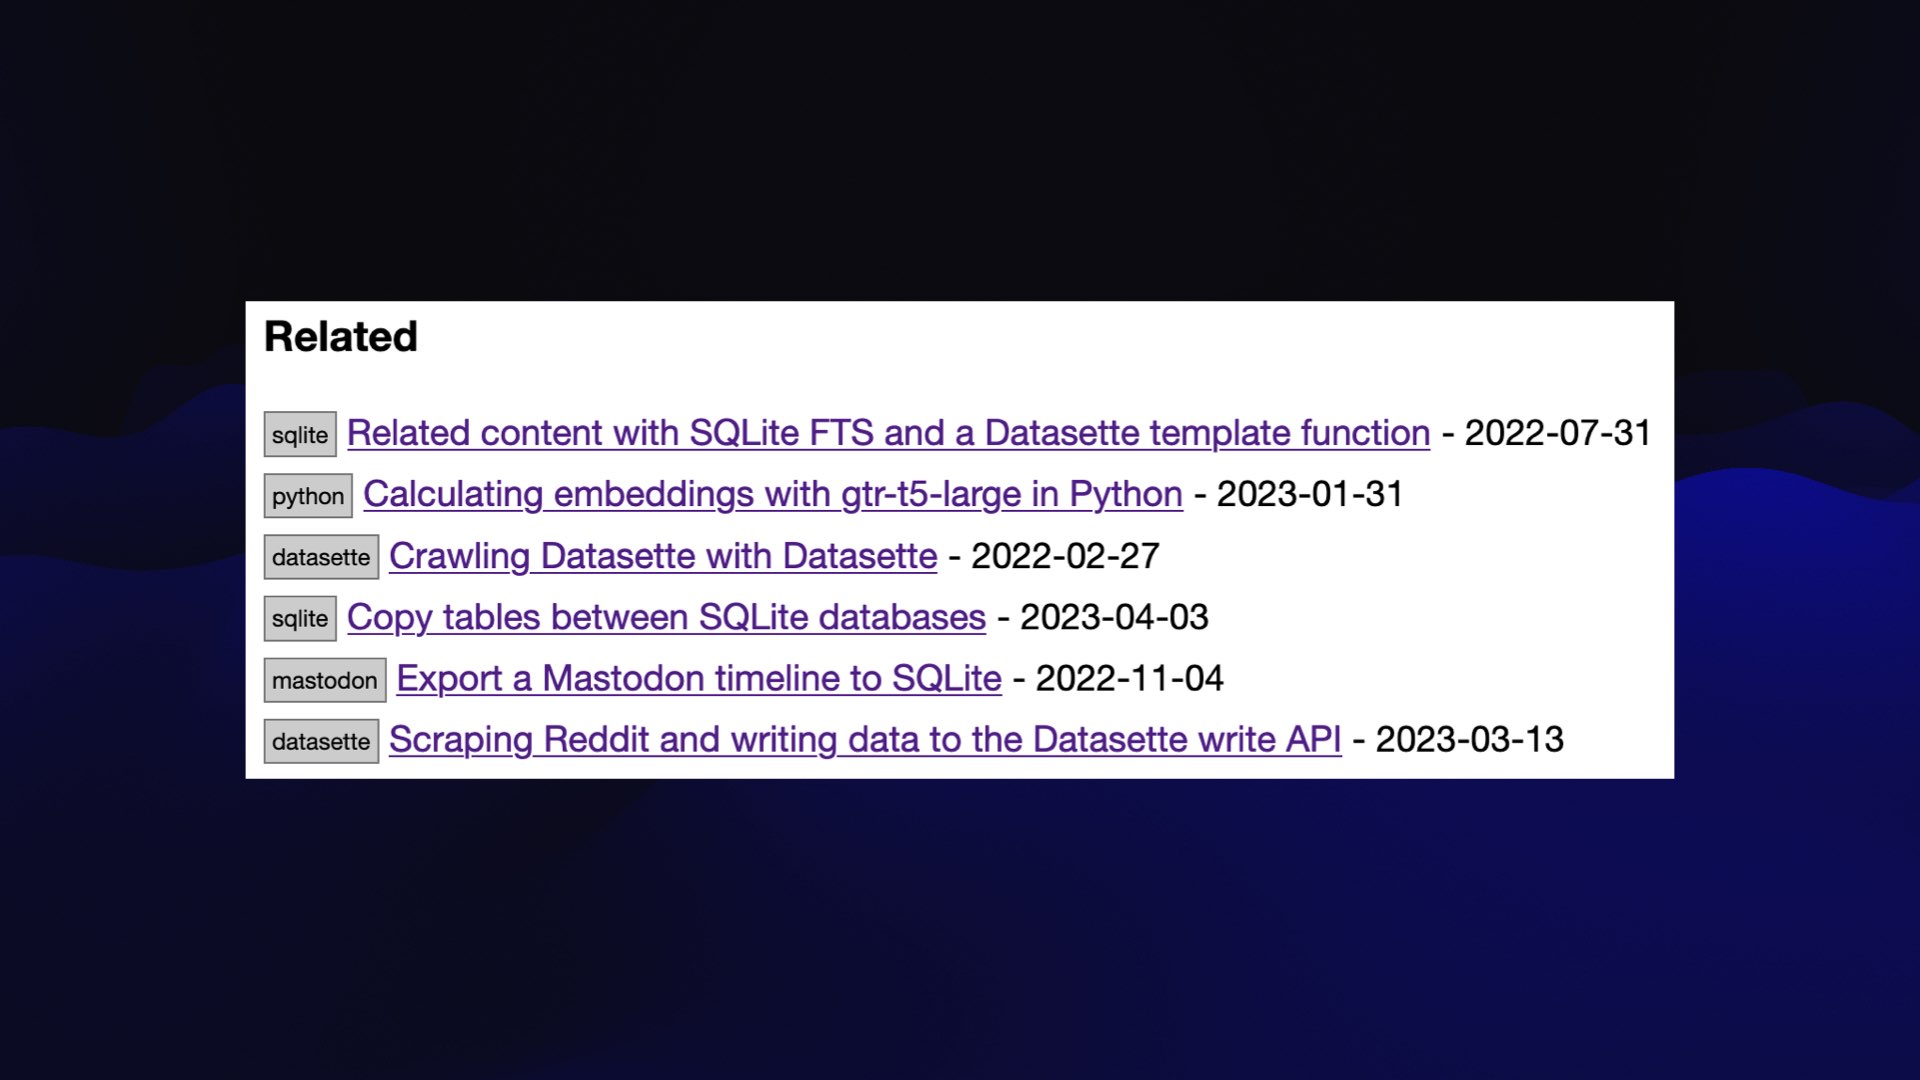 Related      sqlite Related content with SQLite FTS and a Datasette template function - 2022-07-31     python Calculating embeddings with gtr-t5-large in Python - 2023-01-31     datasette Crawling Datasette with Datasette - 2022-02-27     sqlite Copy tables between SQLite databases - 2023-04-03     mastodon Export a Mastodon timeline to SQLite - 2022-11-04     datasette Scraping Reddit and writing data to the Datasette write API - 2023-03-13